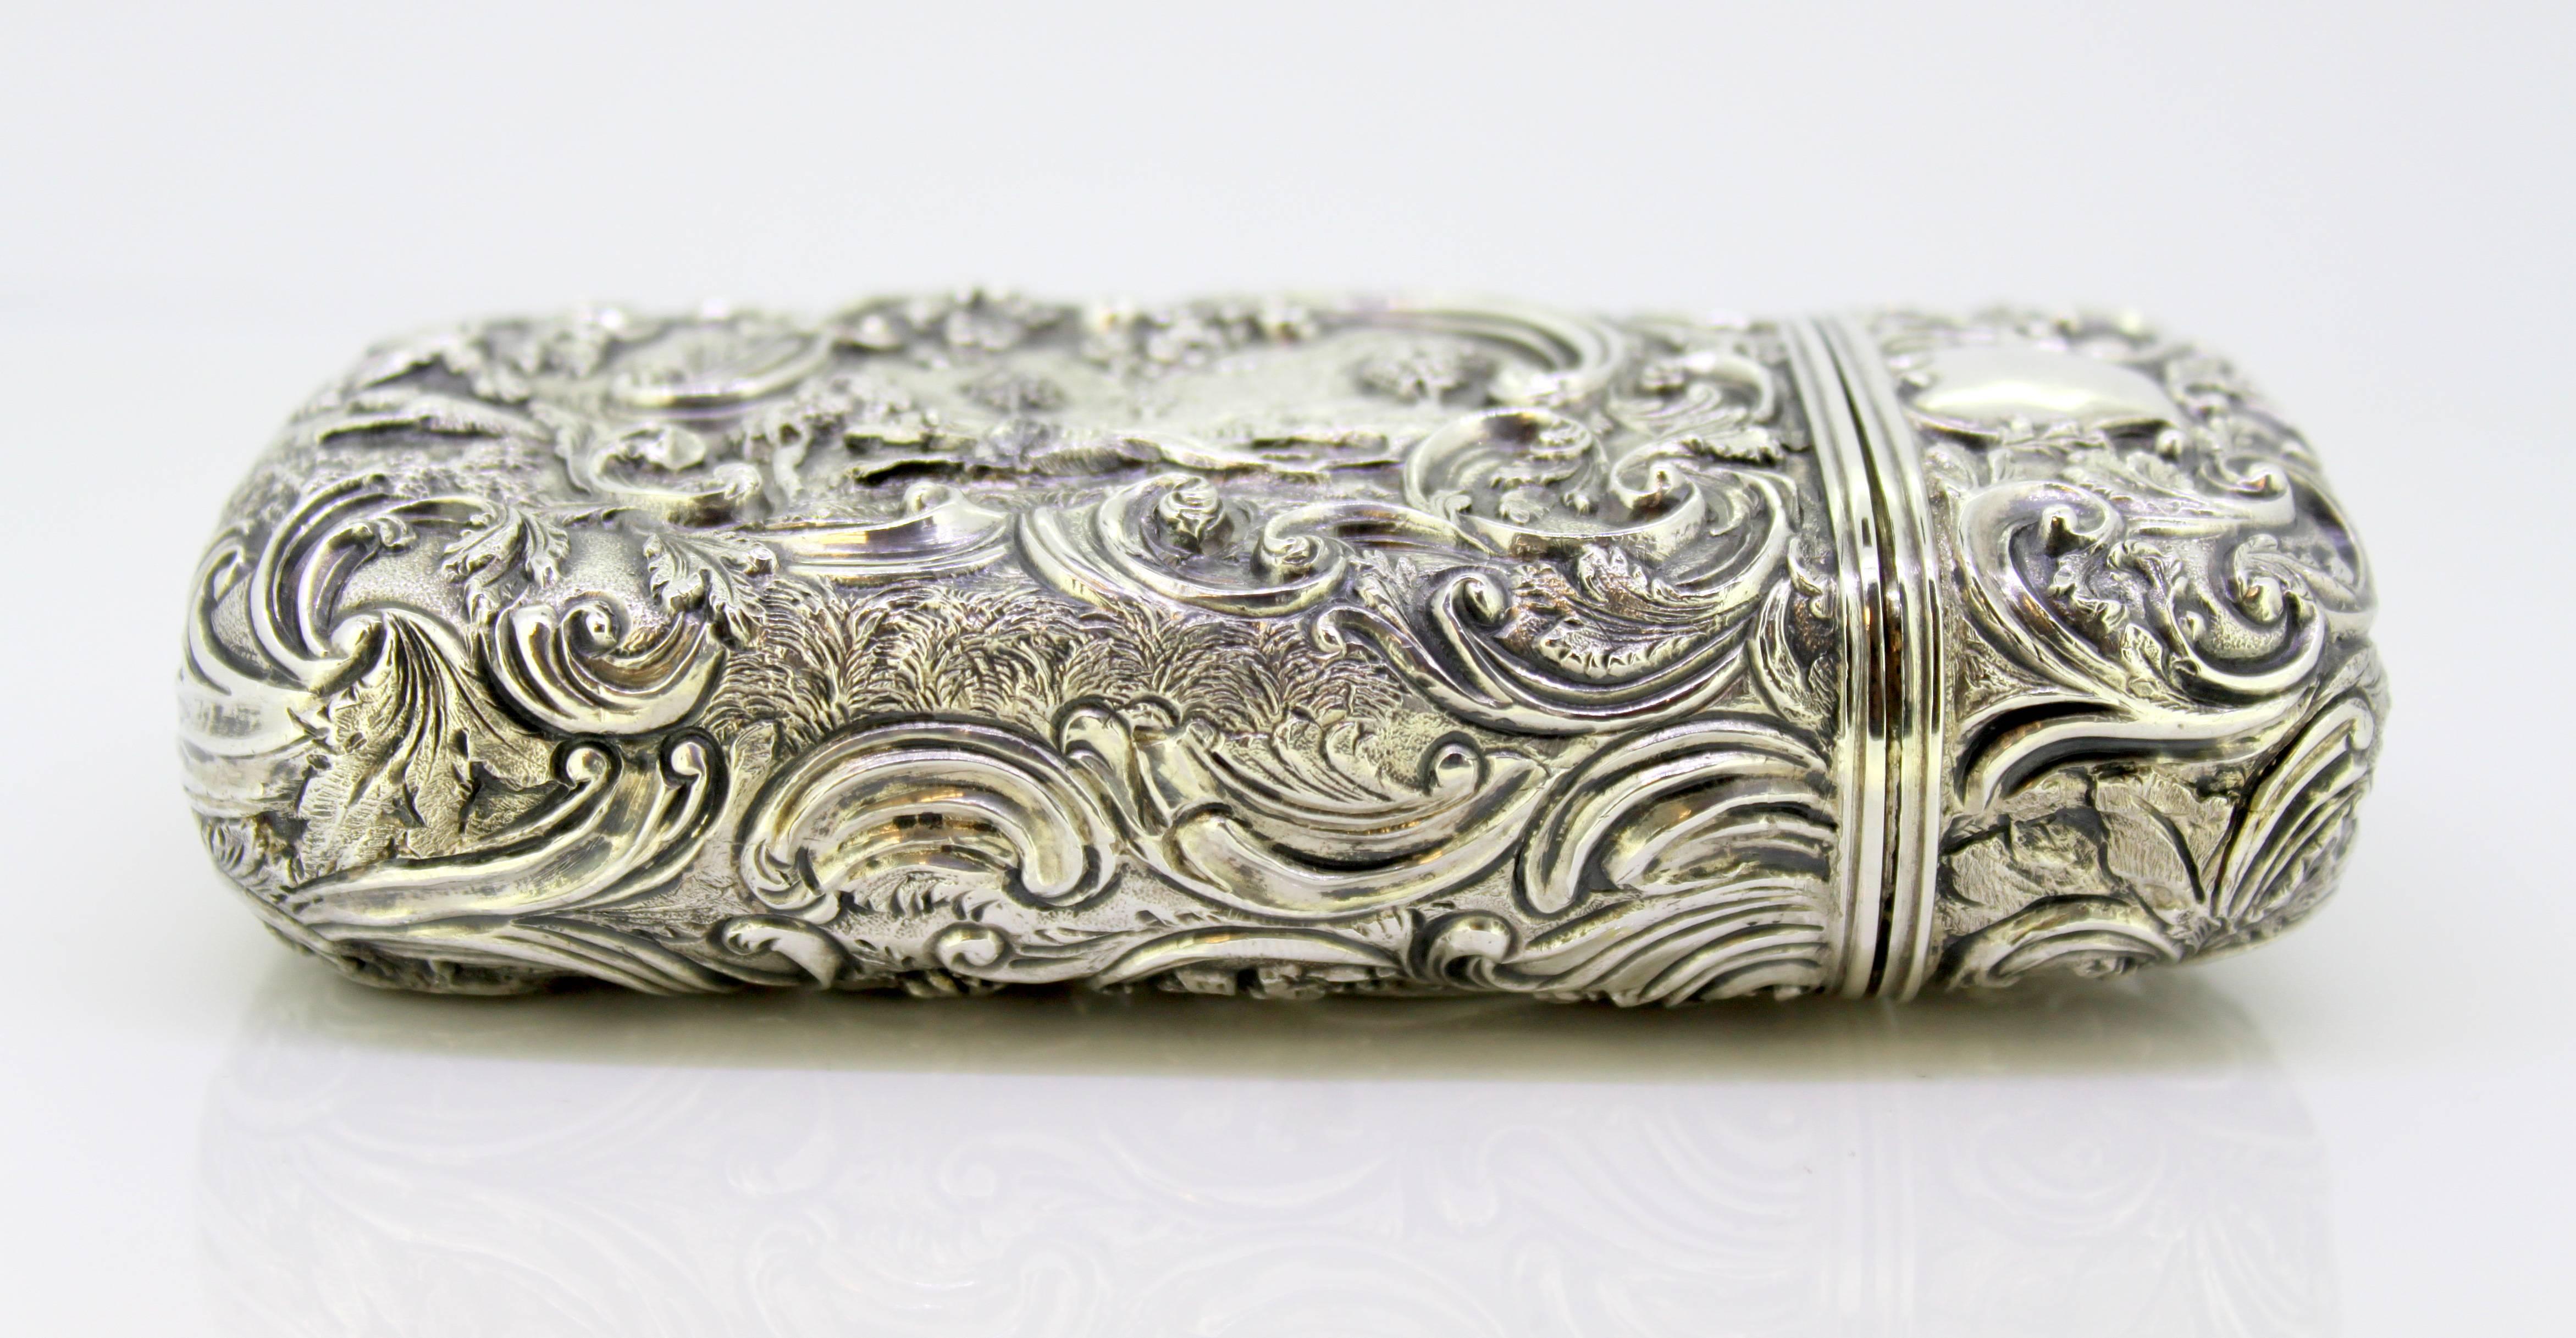 Antique Victorian silver elaborately engraved hunting scene case
Maker: Roberts & Belk
Made in Sheffield 1891
Fully hallmarked.

Dimensions - 
Size : 12.7 x 6 x 3.3 cm
Weight : 120 grams

Condition: Surface wear and tear from general usage,